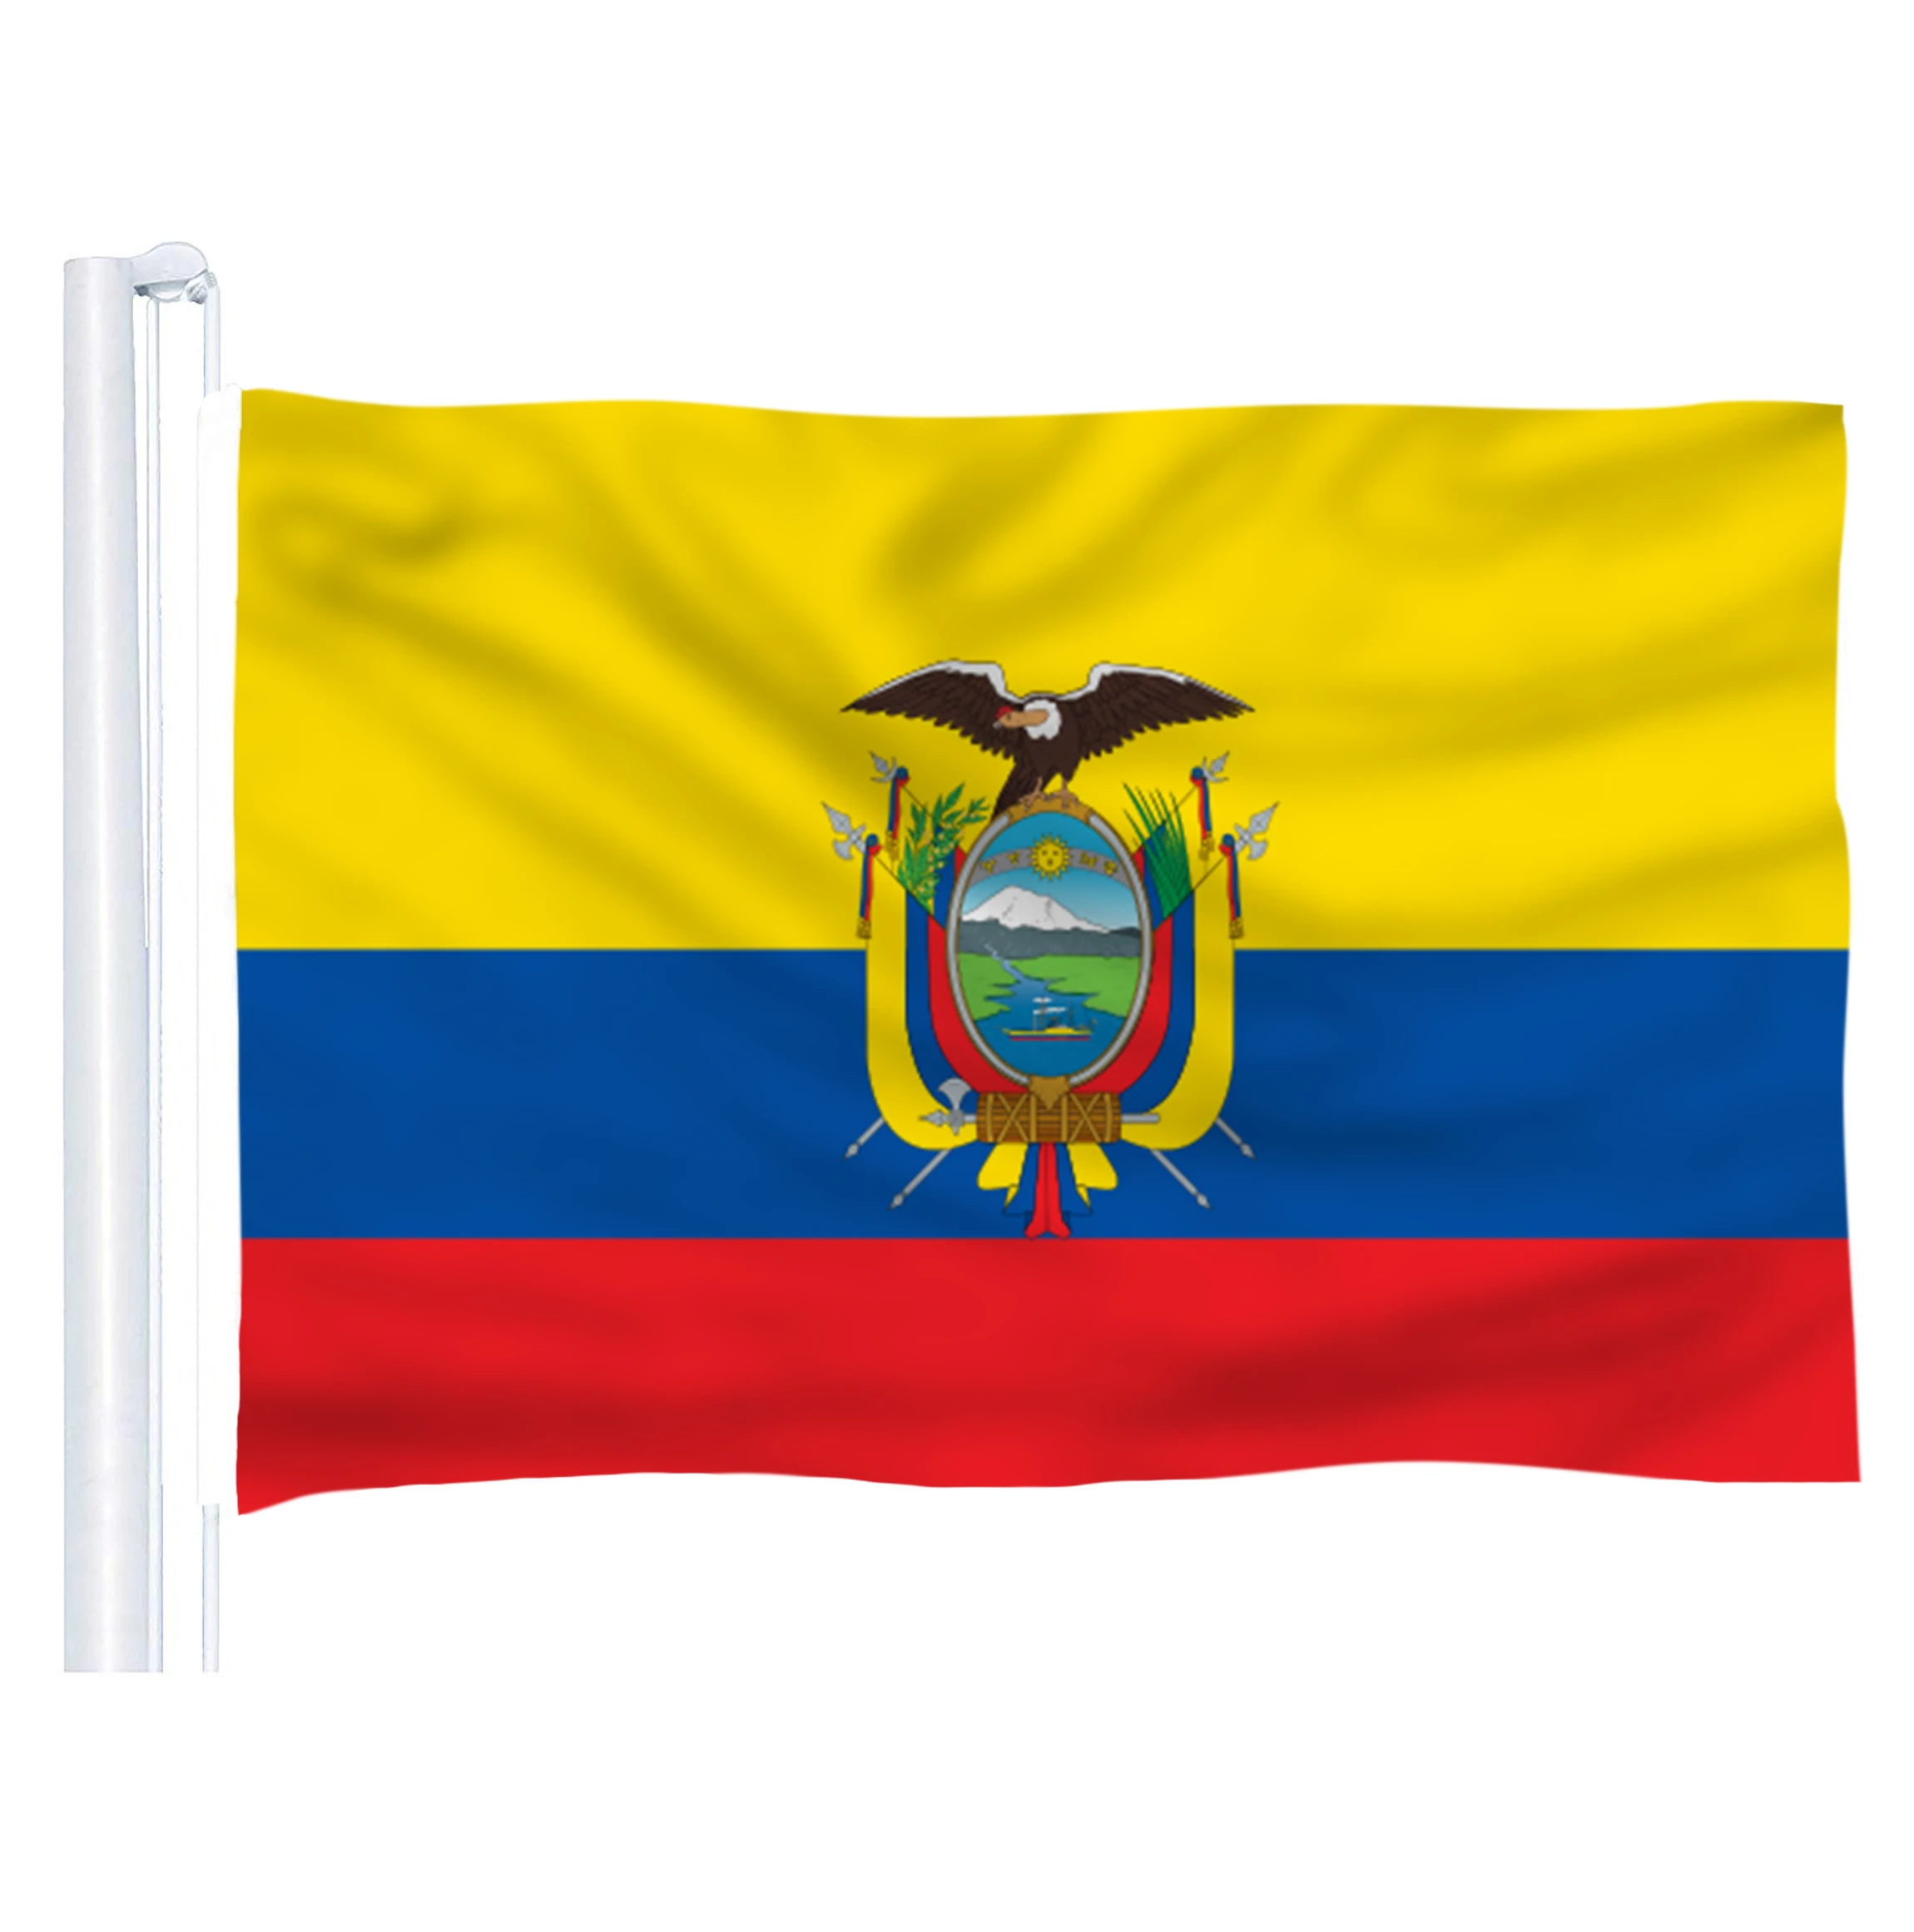 ECUADOR  FLAG FLAGS 5'X3' BRAND NEW POLYESTER POST FREE IN UK 